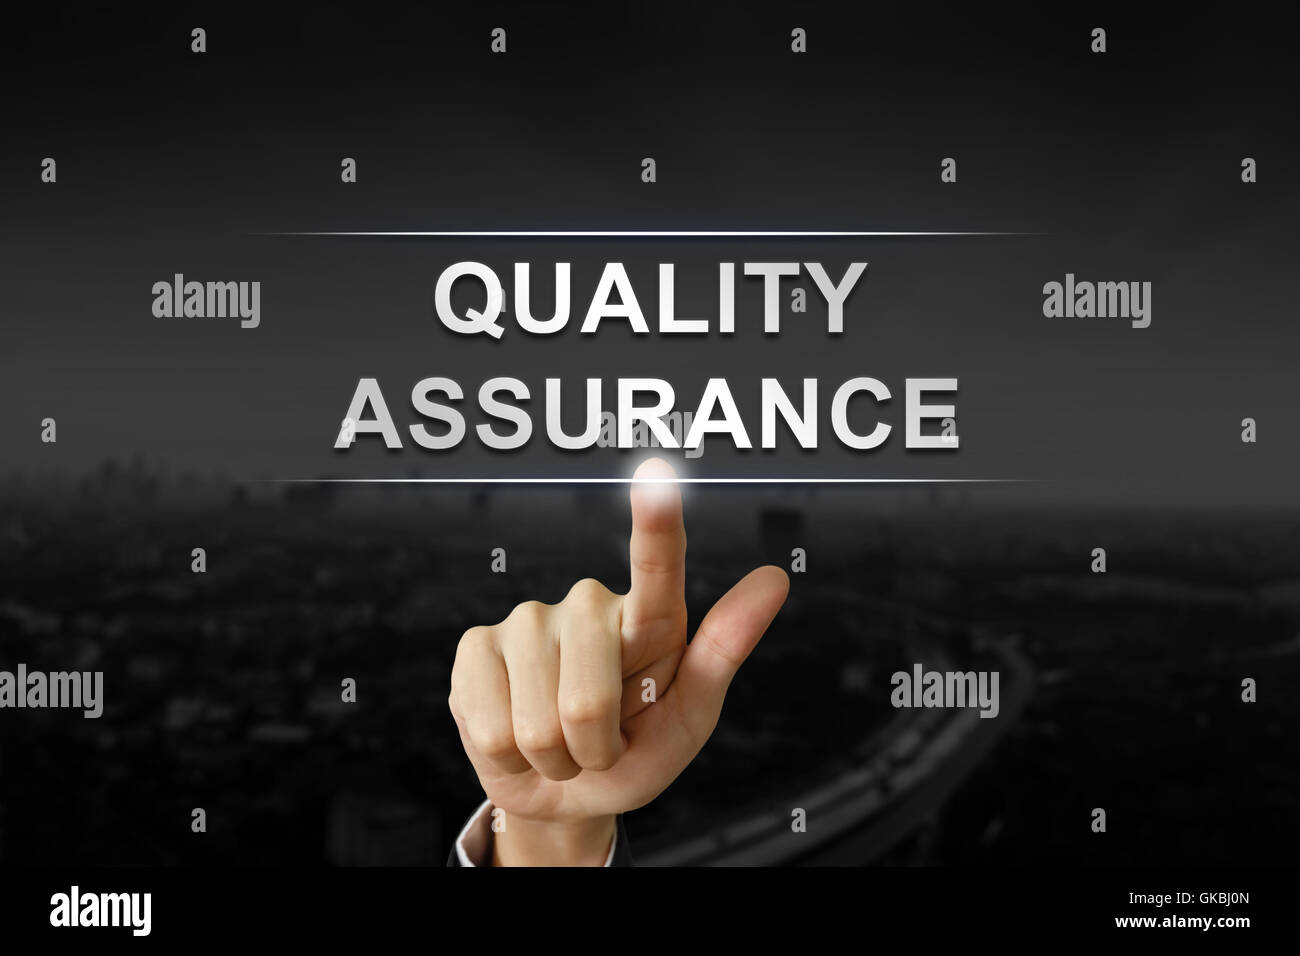 business hand clicking quality assurance button on black blurred background Stock Photo